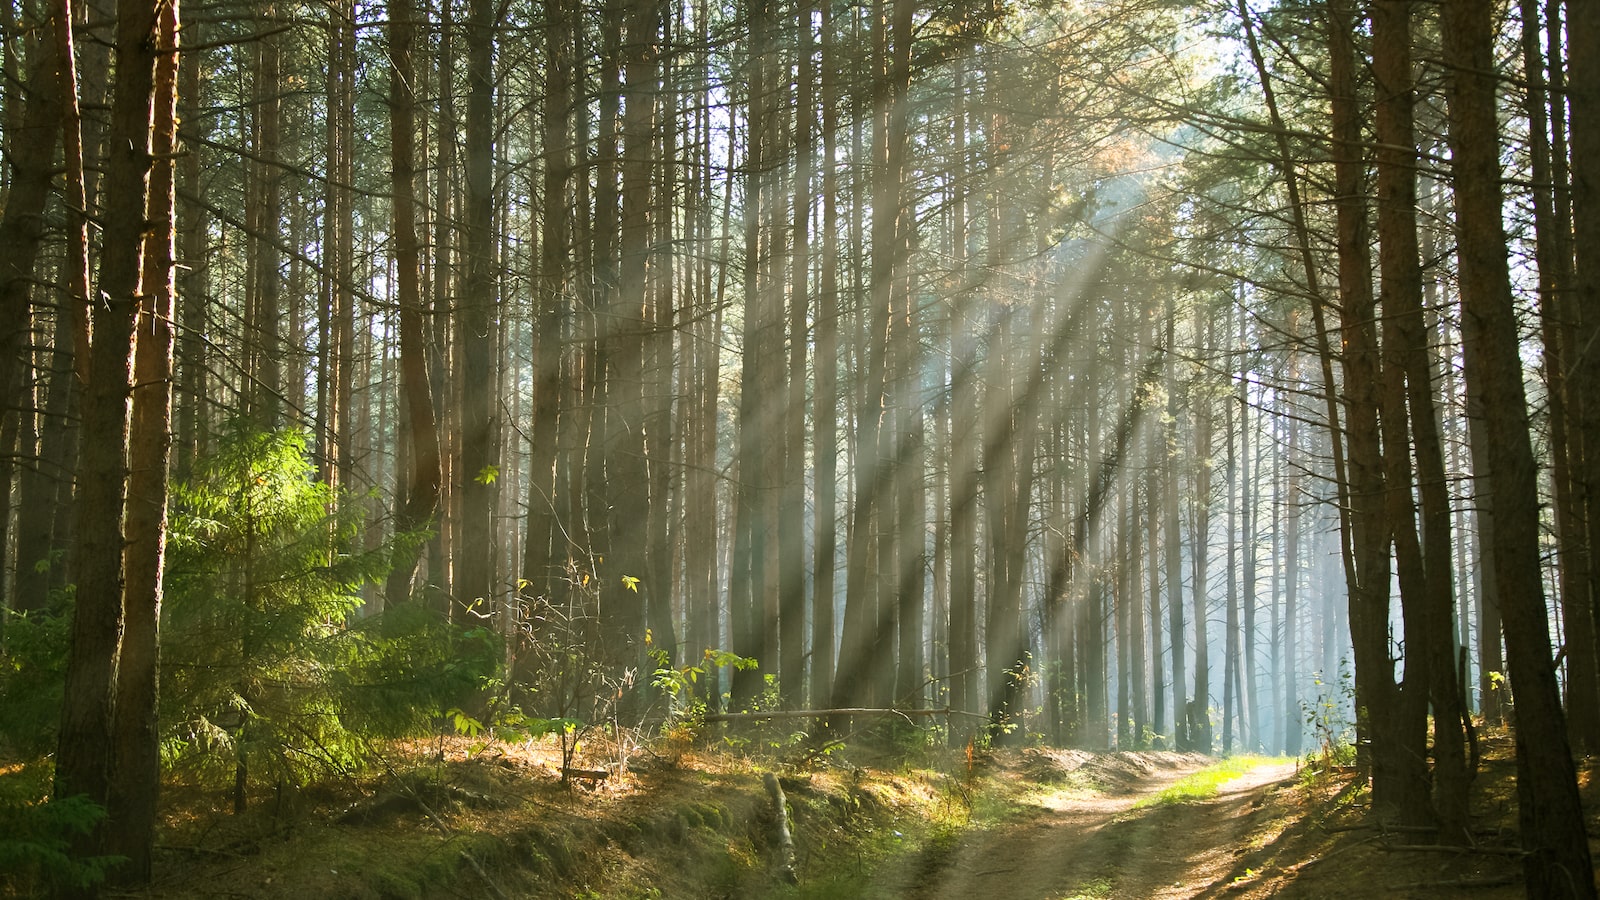 Sunlight streaming through trees in the boreal forest.